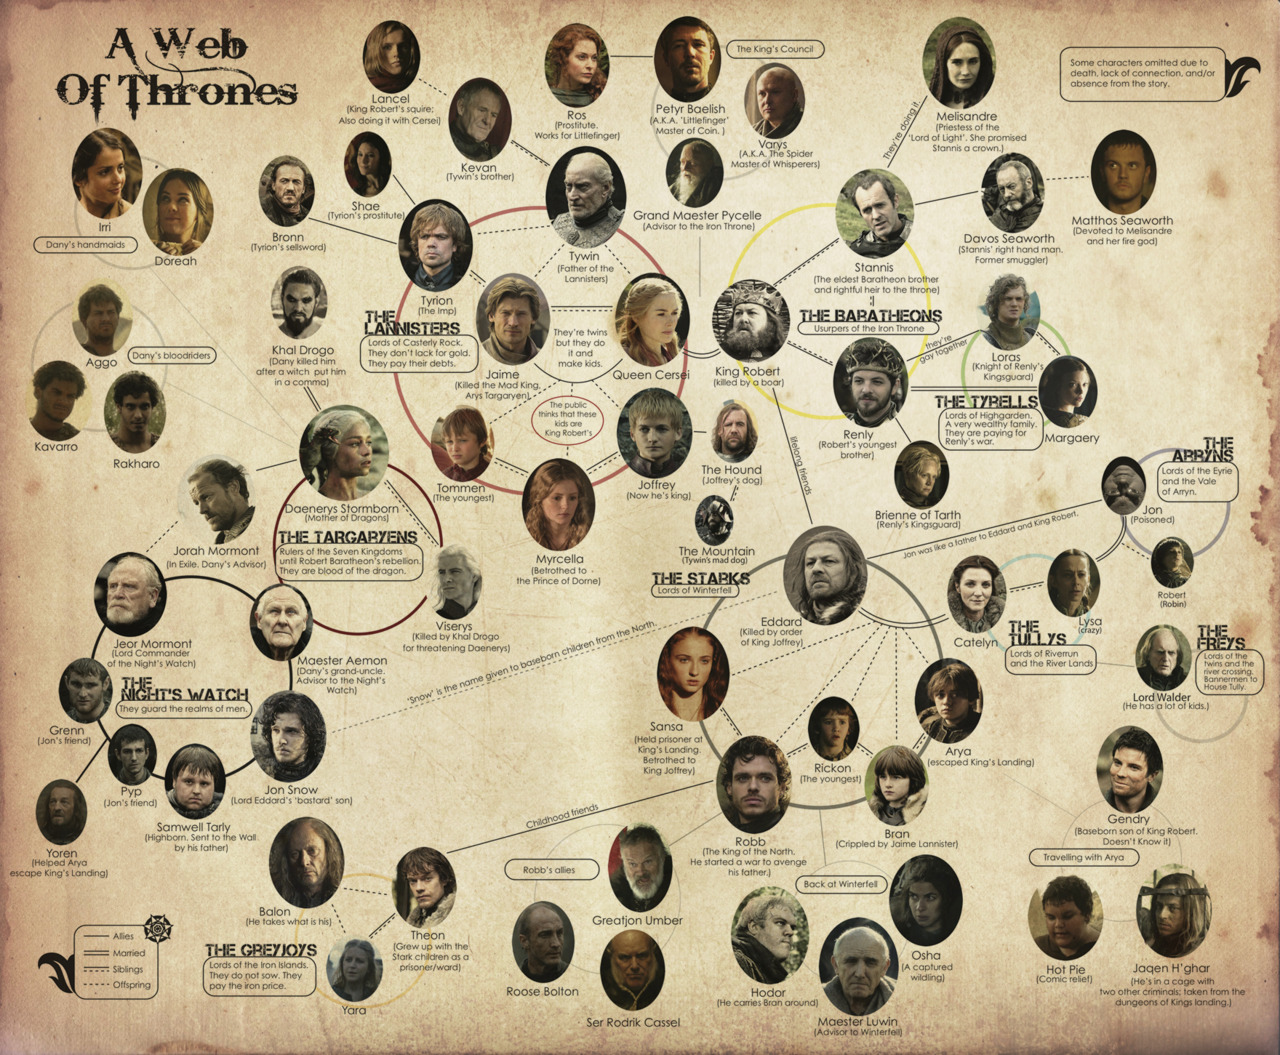 theKONGBLOG™: HBO's Game Of Thrones: Family Tree